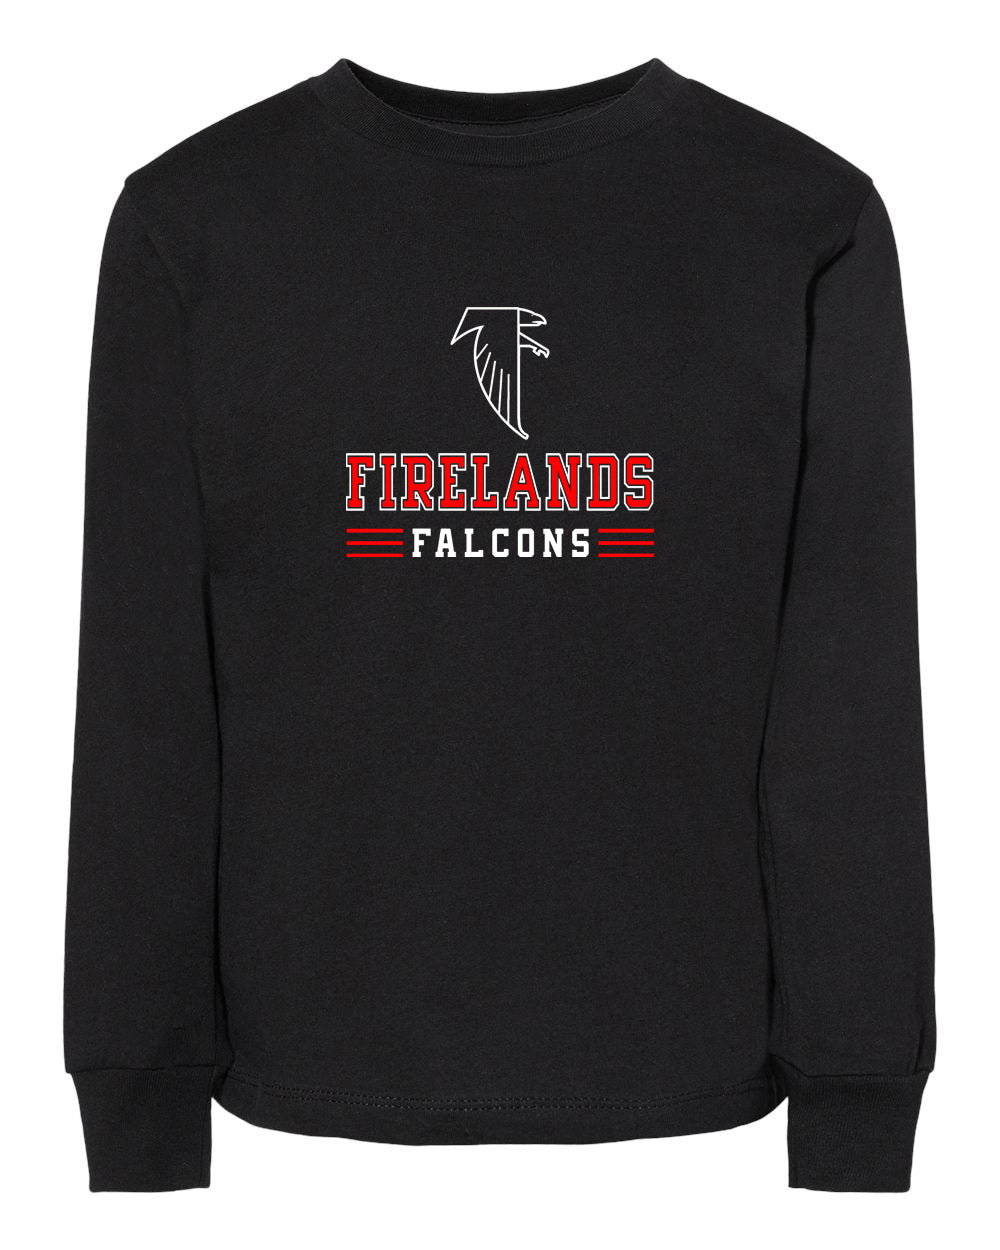 Youth - Firelands Falcons - Long Sleeve Tee - Mistakes on the Lake